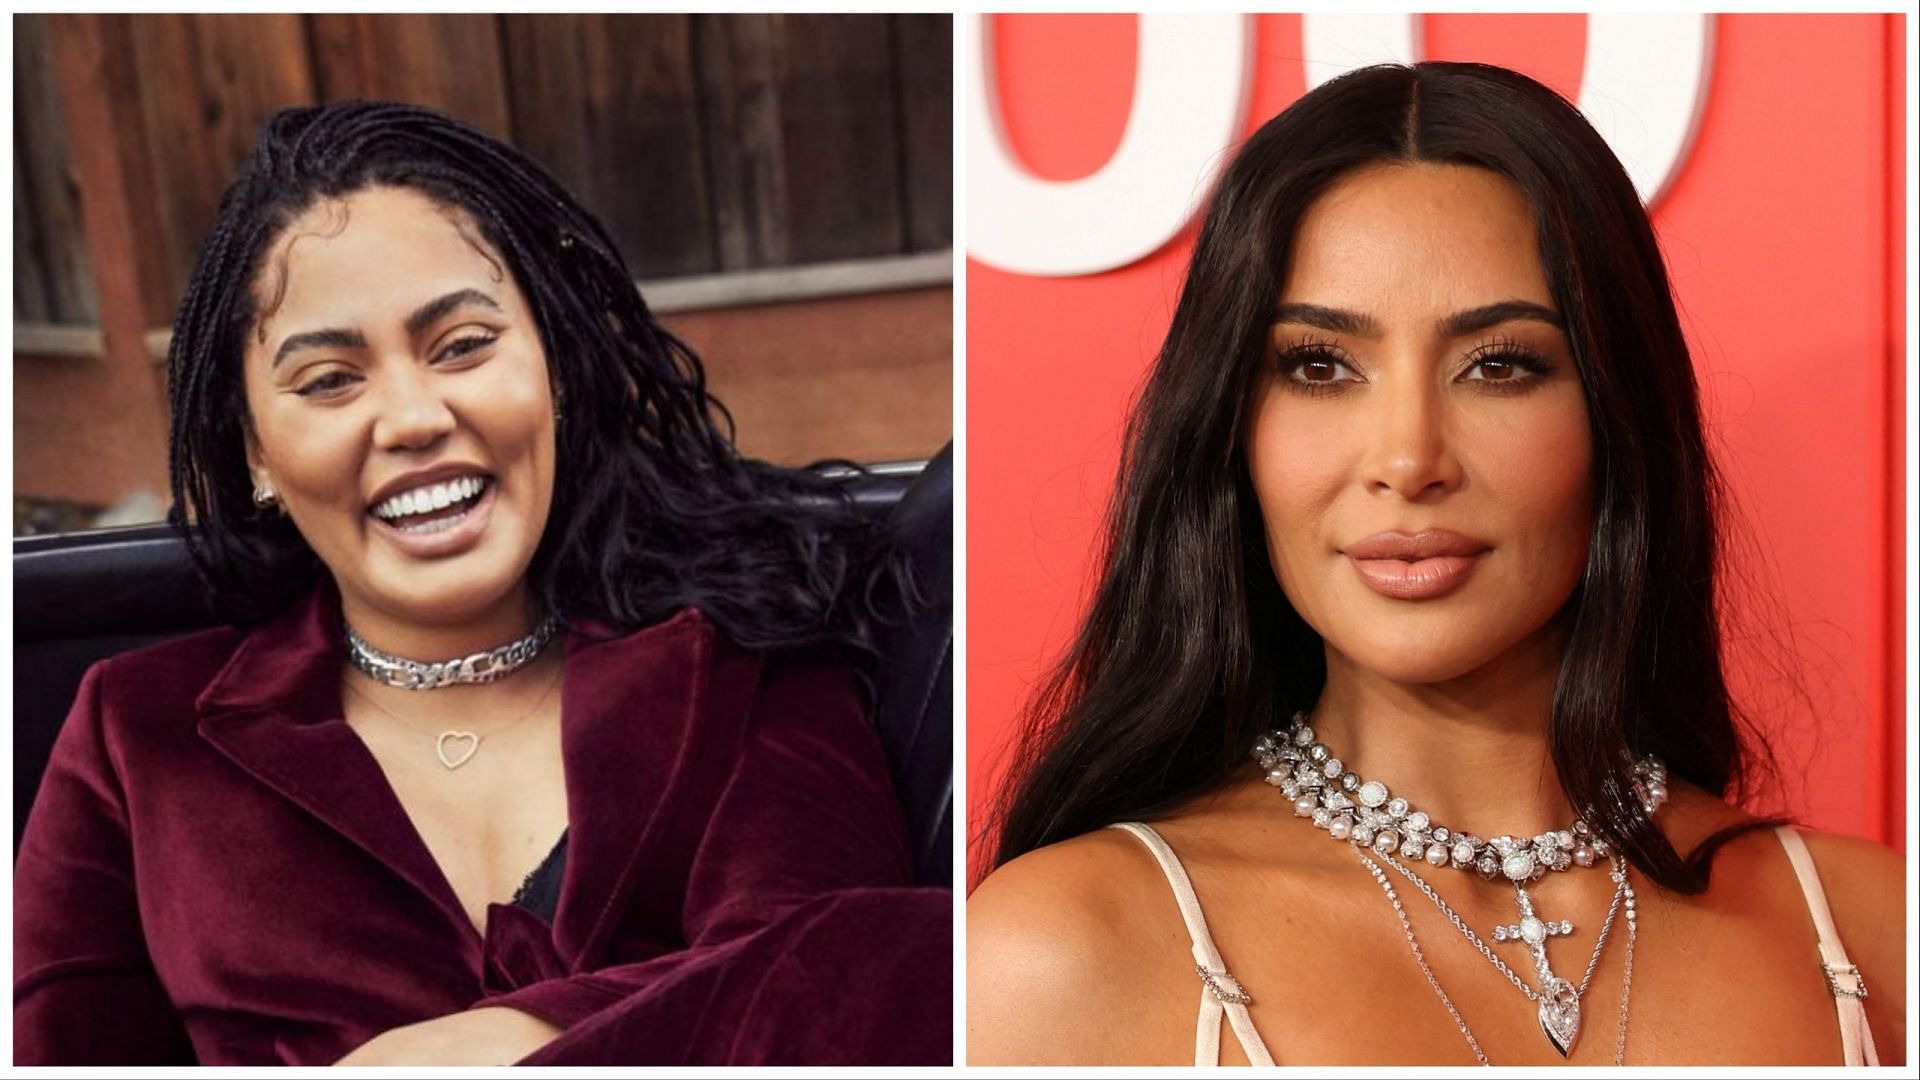 Ayesha Curry and Kim Kardashian in attendance of gala that helped raise more than $12 million for children in poverty